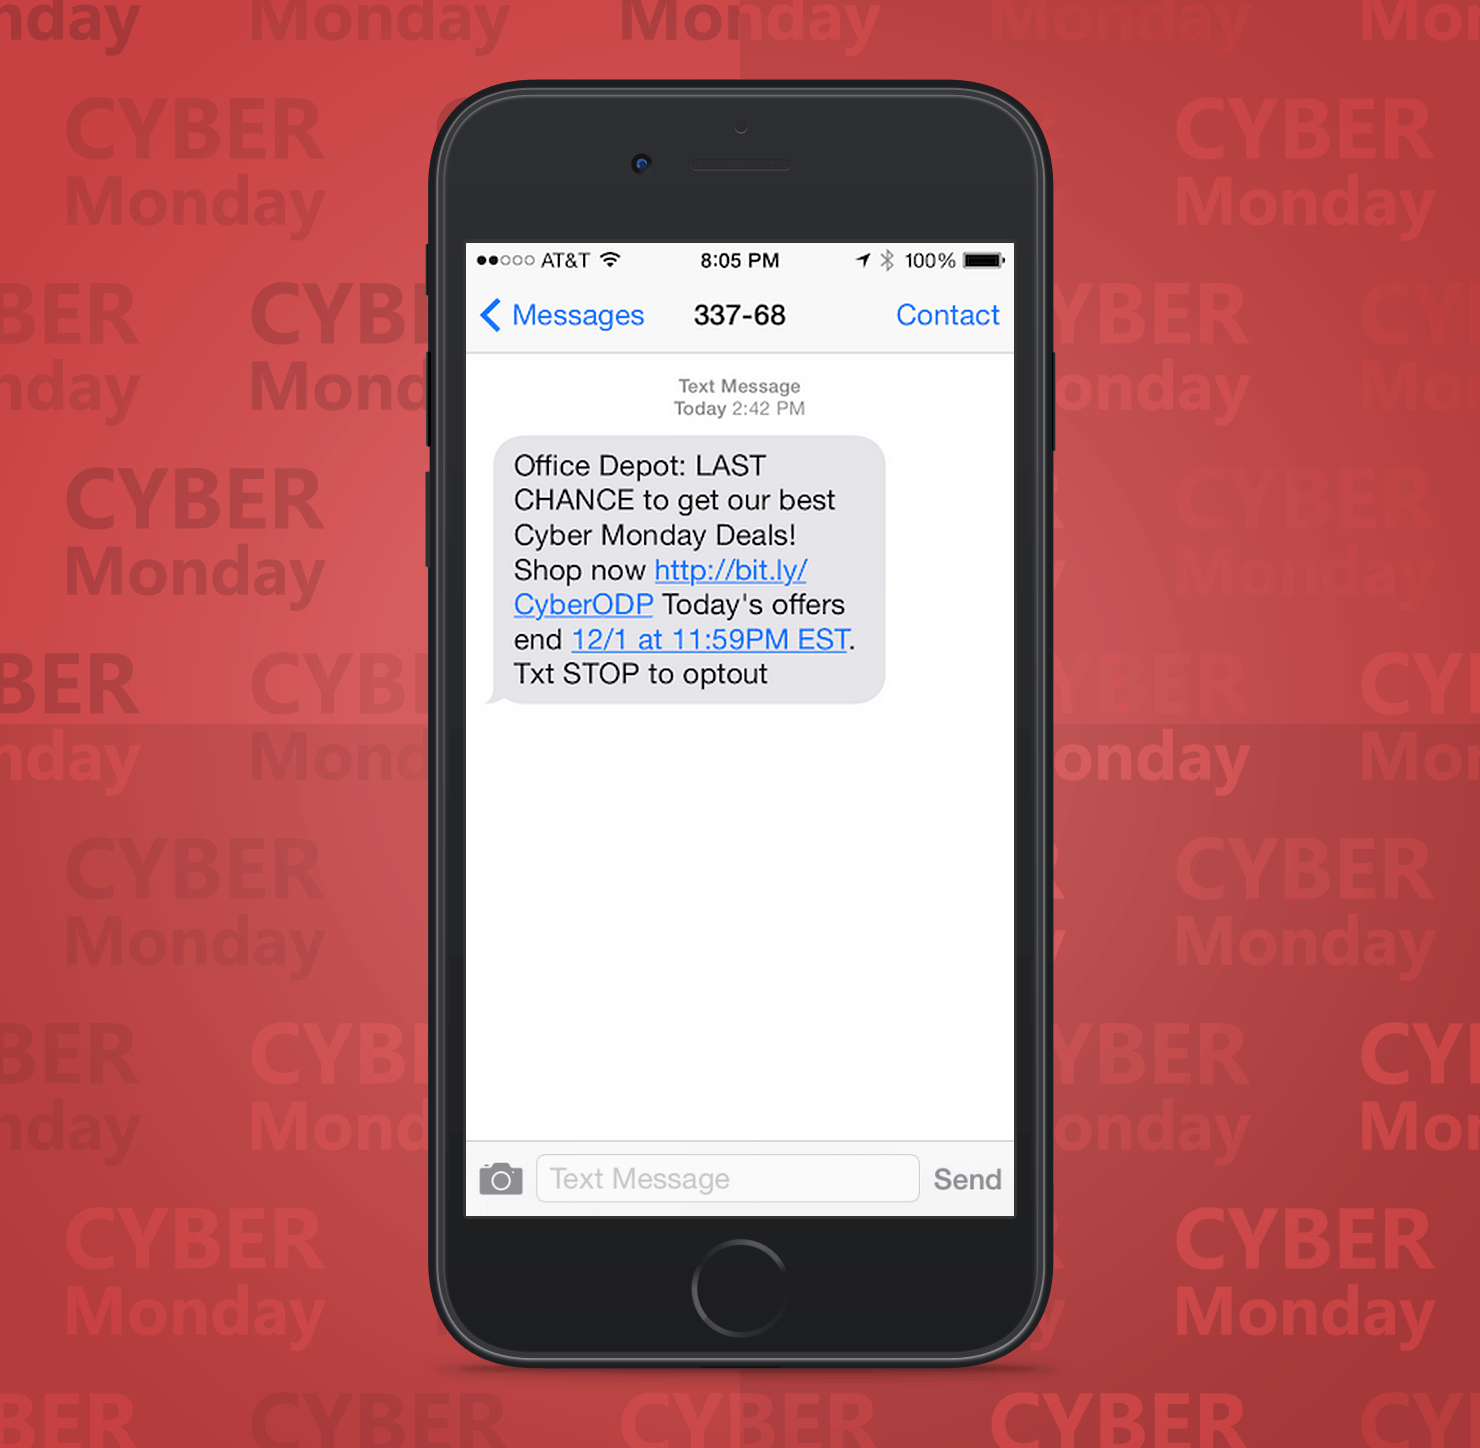 SMS Coupon Example Sent on Cyber Monday From Office Depot Retail Stores to Customers